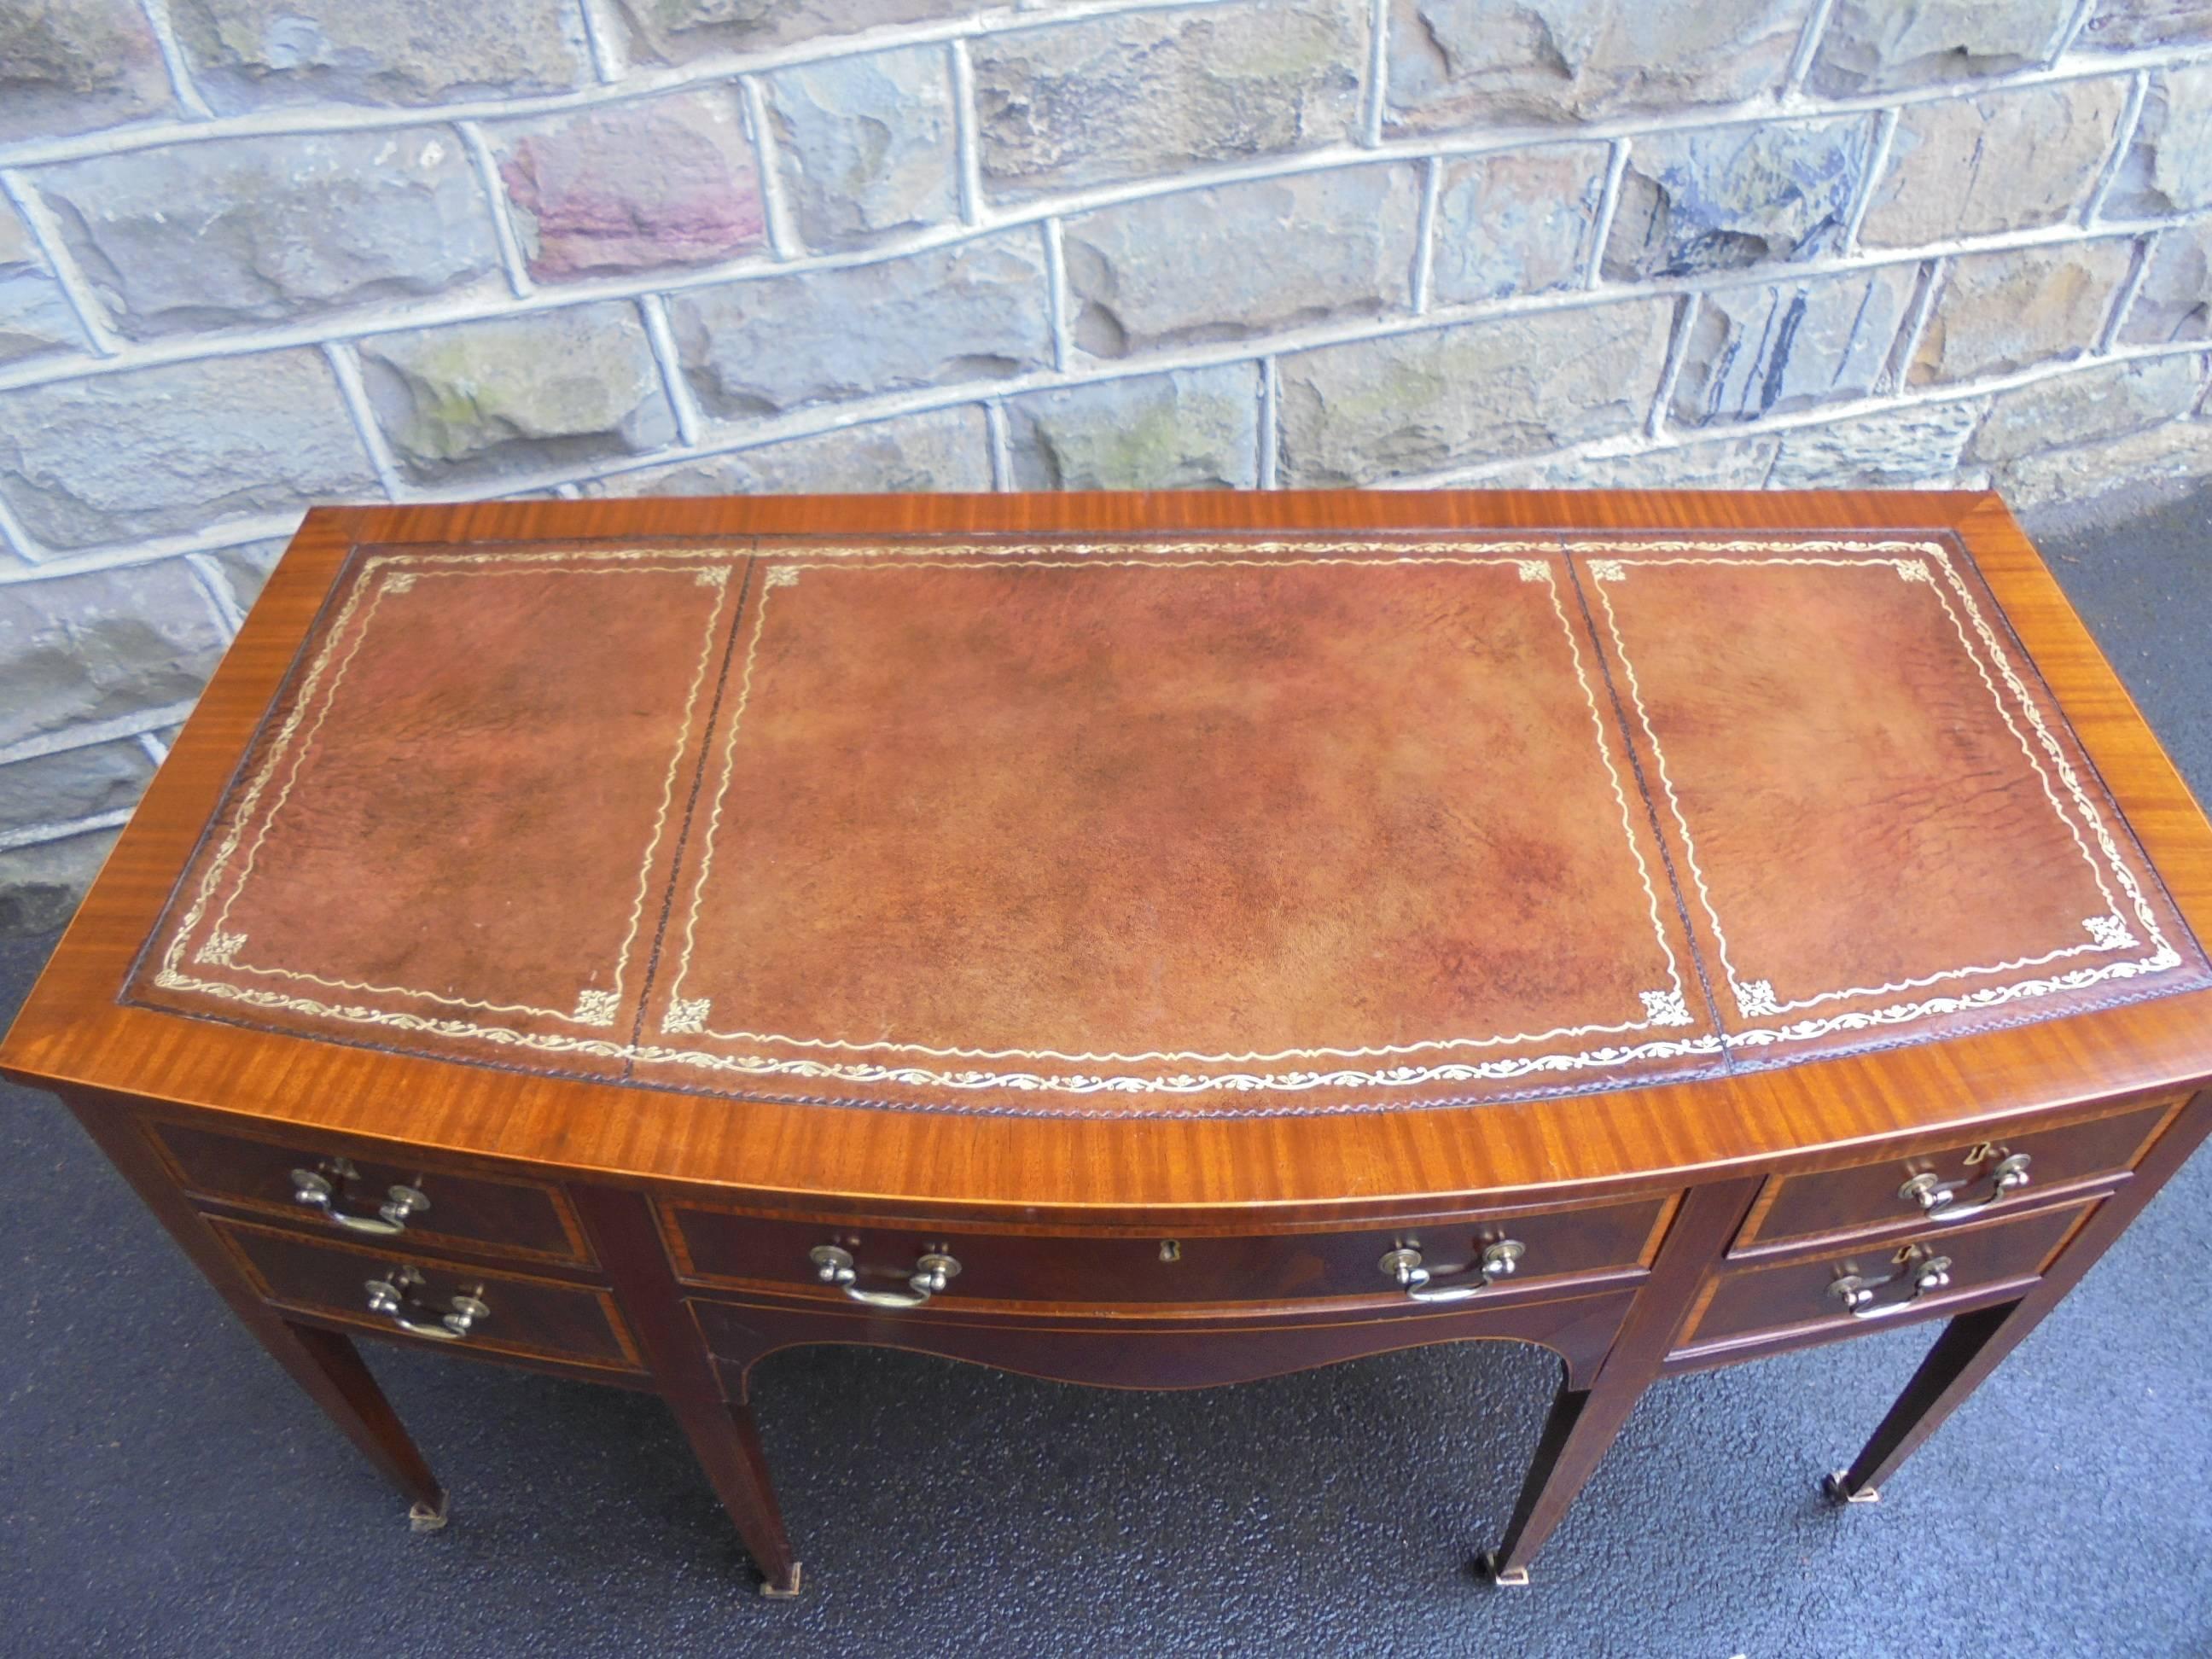 Offered for sale is this nice quality Edwardian inlaid mahogany writing desk.

Leather top with gilt tooled border. Central draw with two smaller draws either side. All the draw have inlaid decoration, brass drop handles and locks. Comes with a